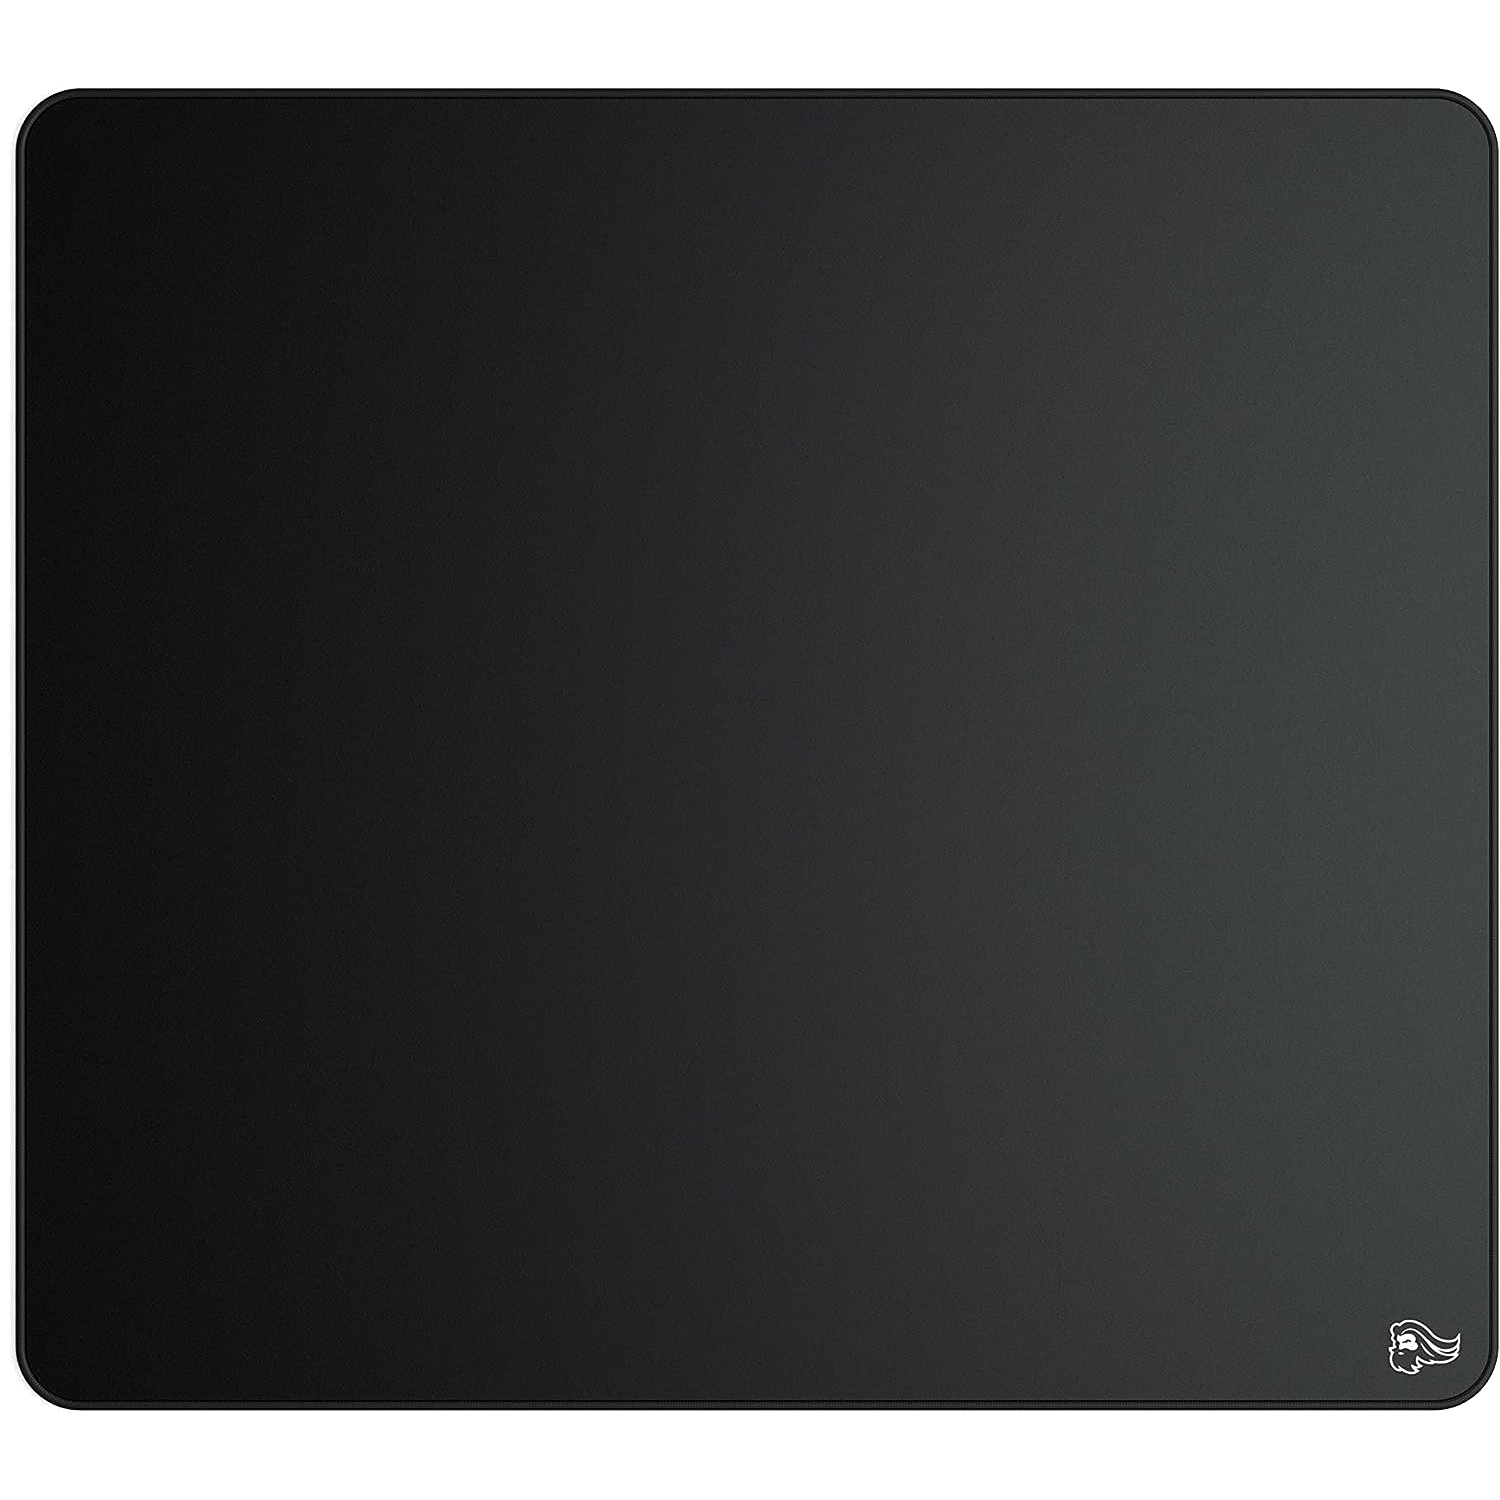 Glorious Elements cloth mouse pad in black.